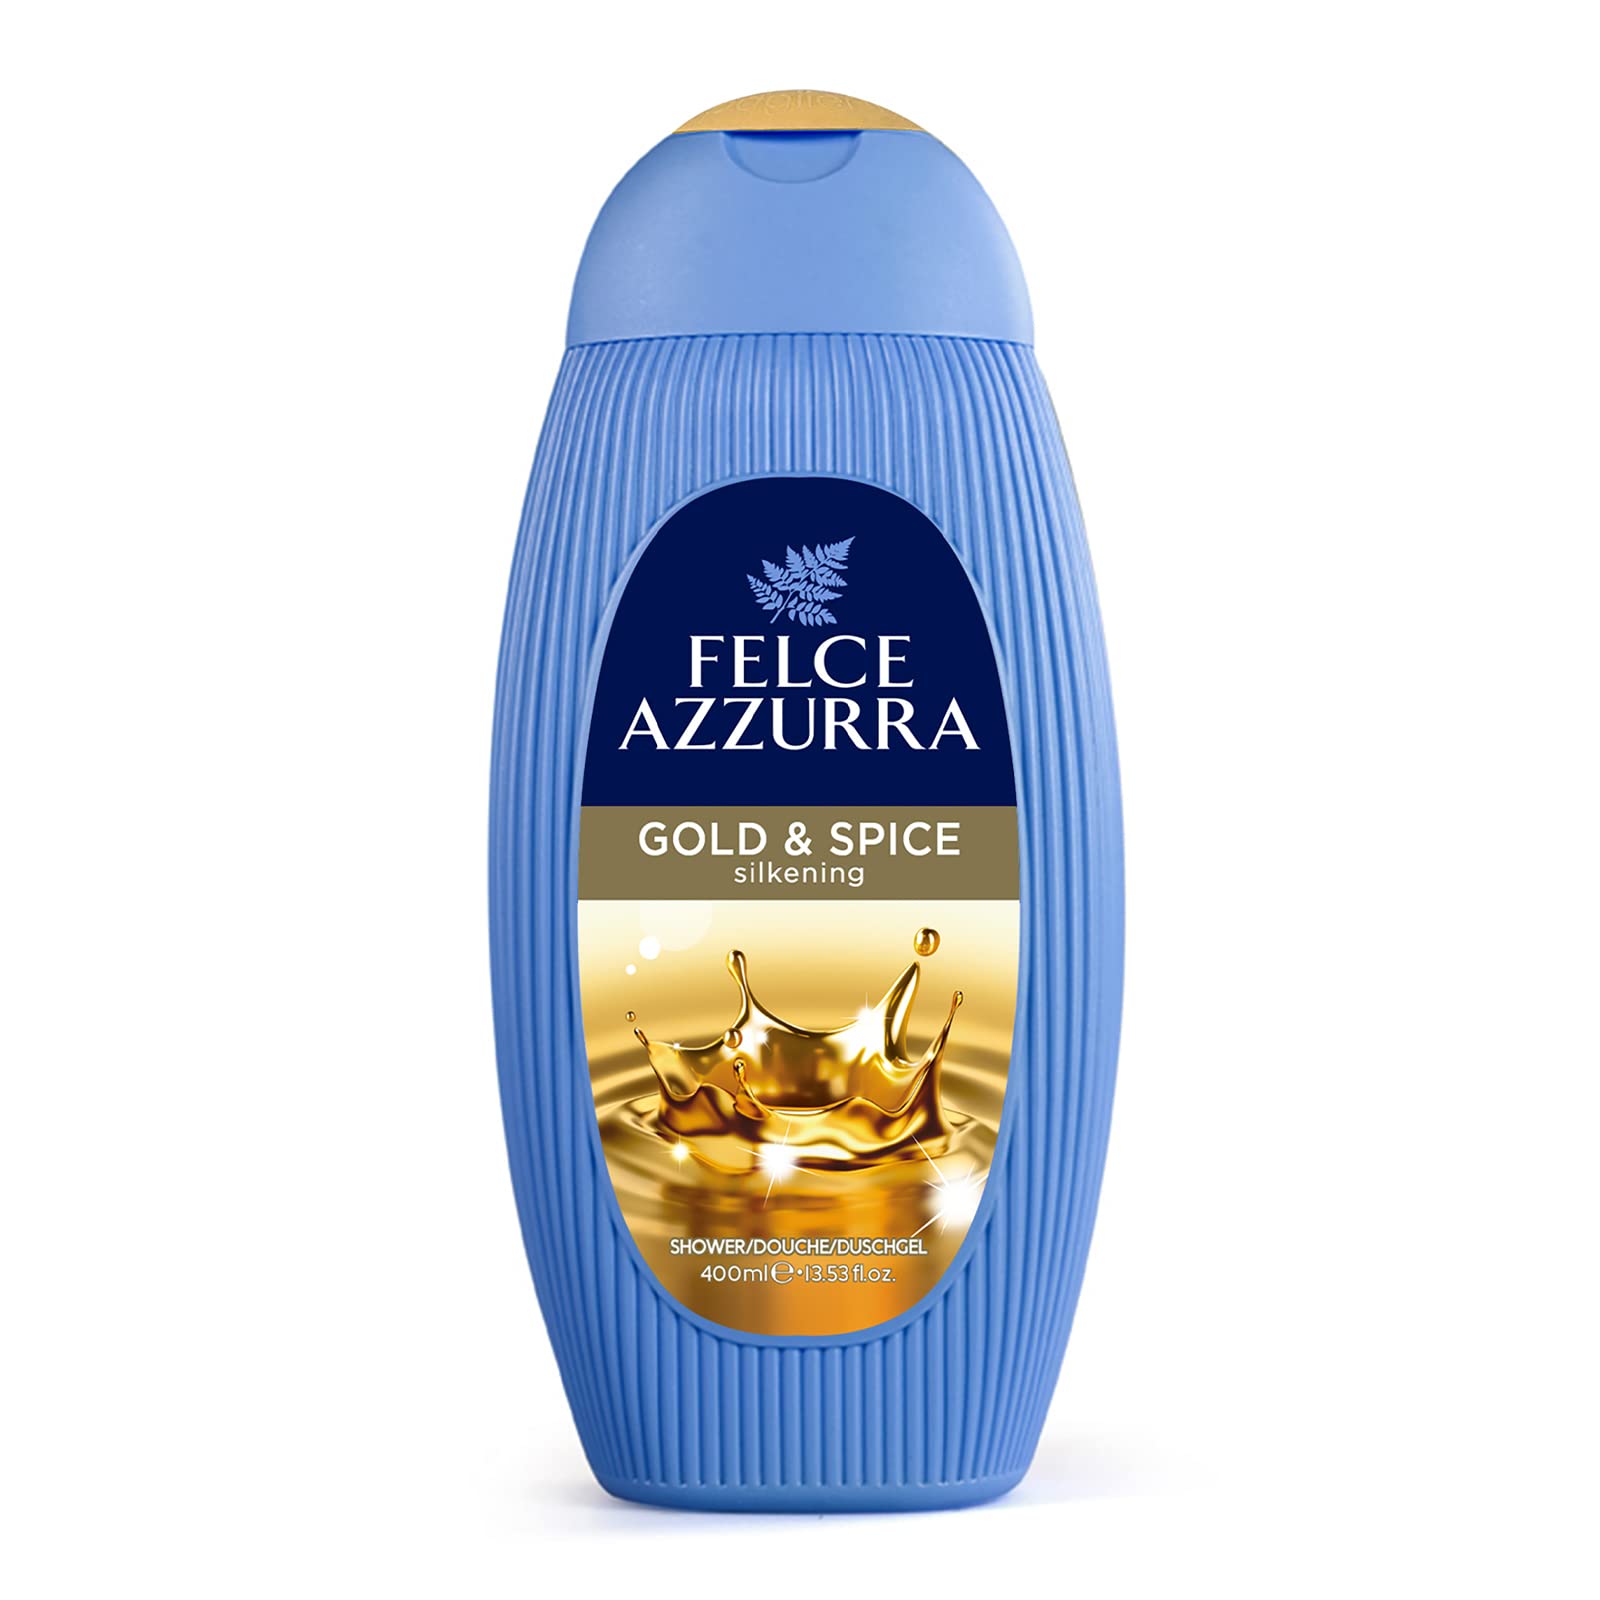 Felce Azzurra Gold And Spices - Silkening Essence Shower Gel - Blend With  Fruity And Aromatic Notes - Leaves Your Skin Soft And Pleasantly Perfumed -  Shower Gel Is Dermatologically Tested 